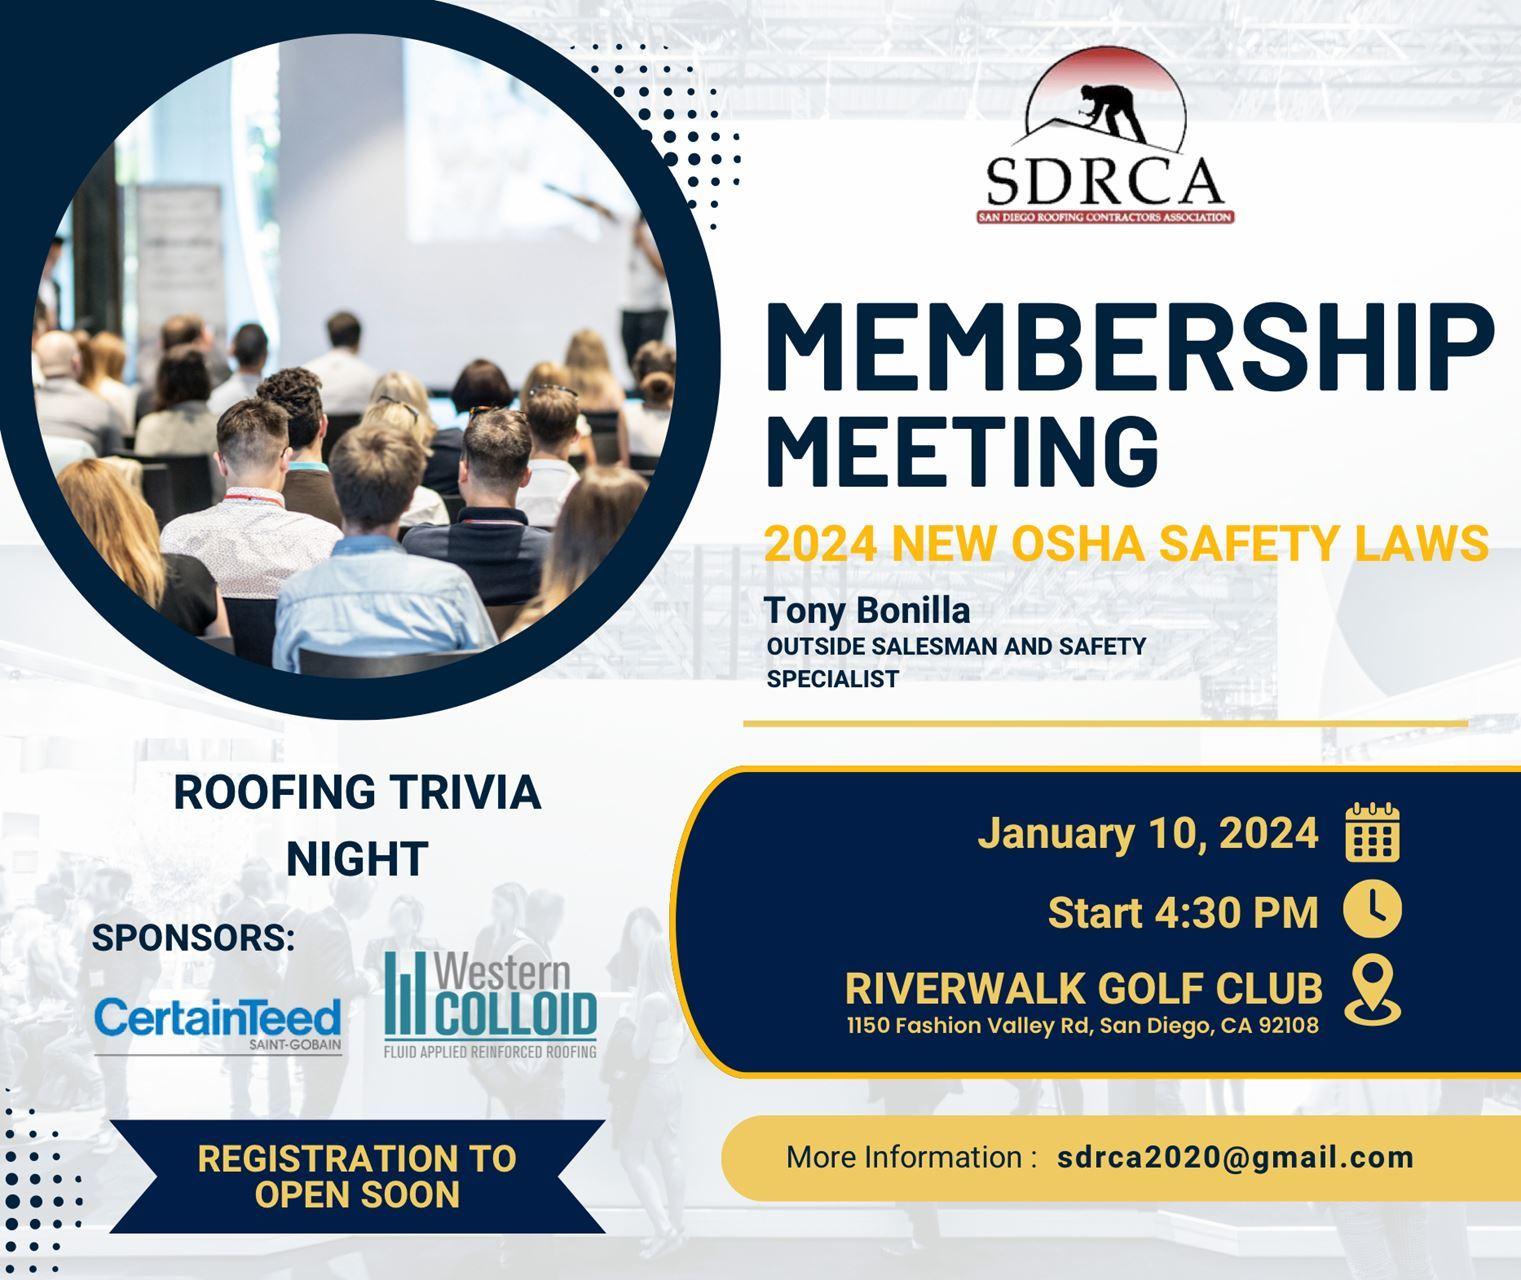 SDRCA - Registration for our January Membership Meeting is open!